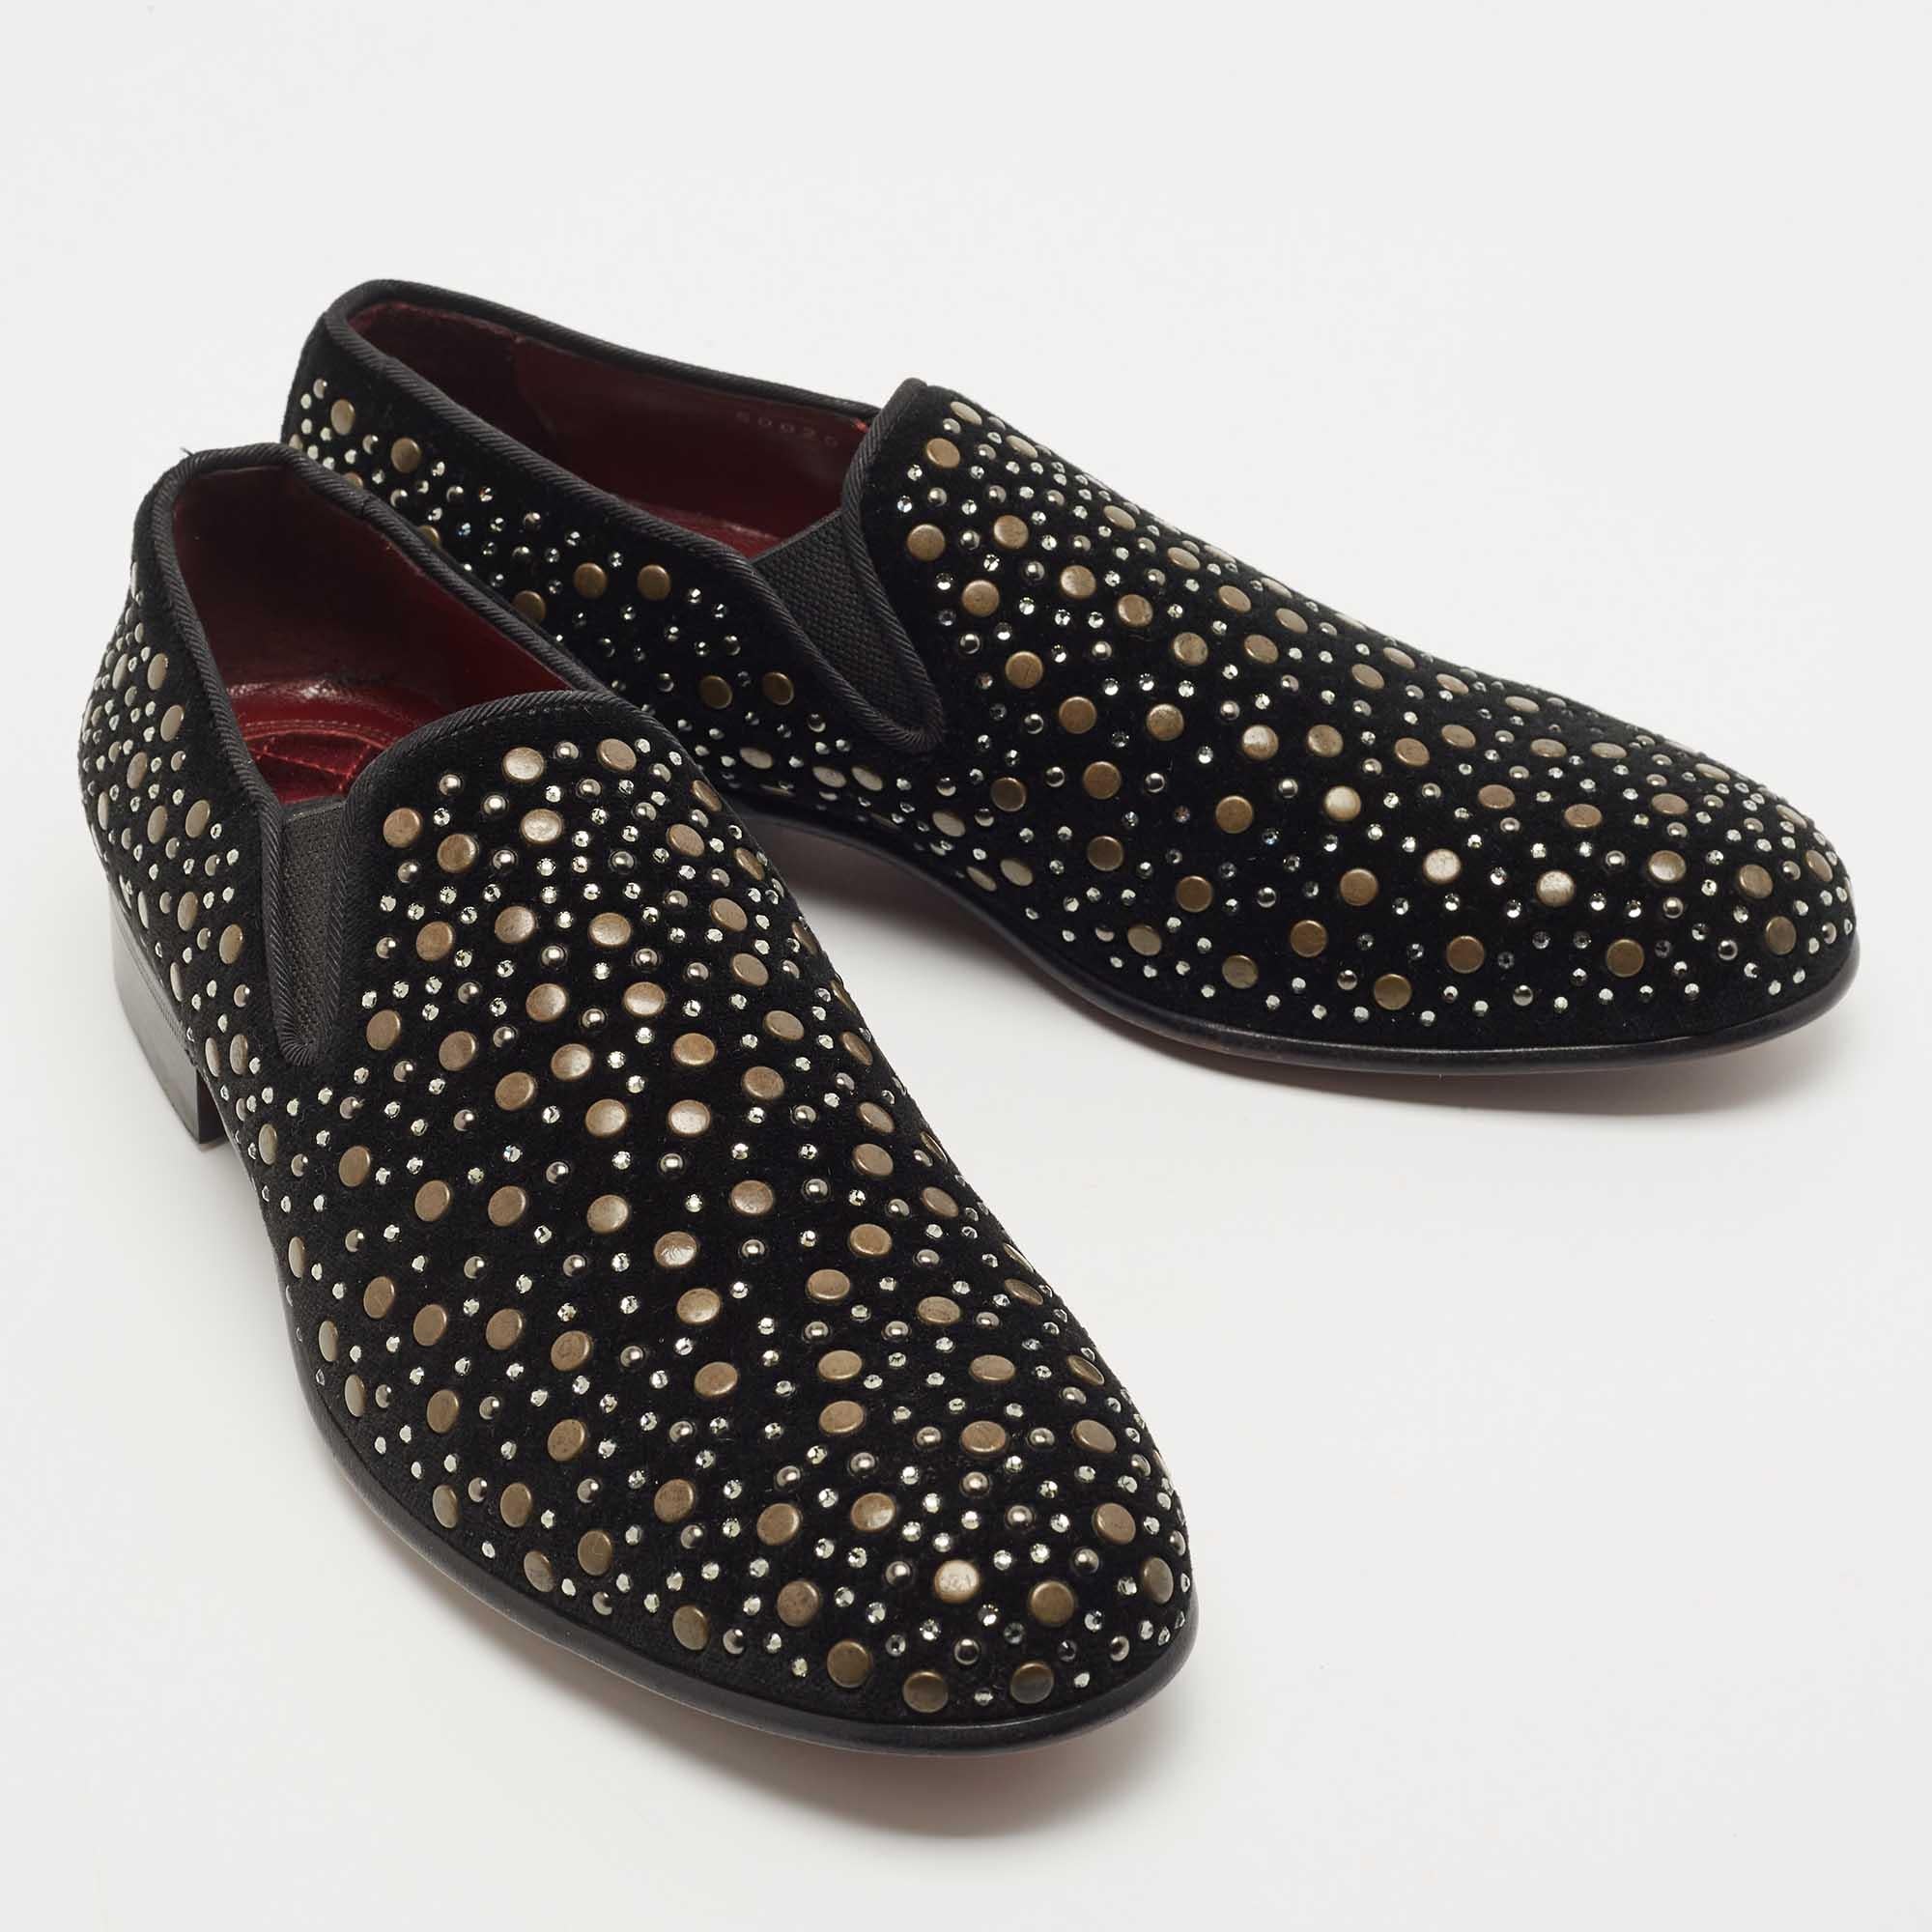 Add a pinch of jazz to those muted outfits of yours with these glamorous loafers from the house of Dolce & Gabbana. Embodying the spirit of the label in the truest form, these black velvet shoes are punctuated with gold-tone studs and crystals all